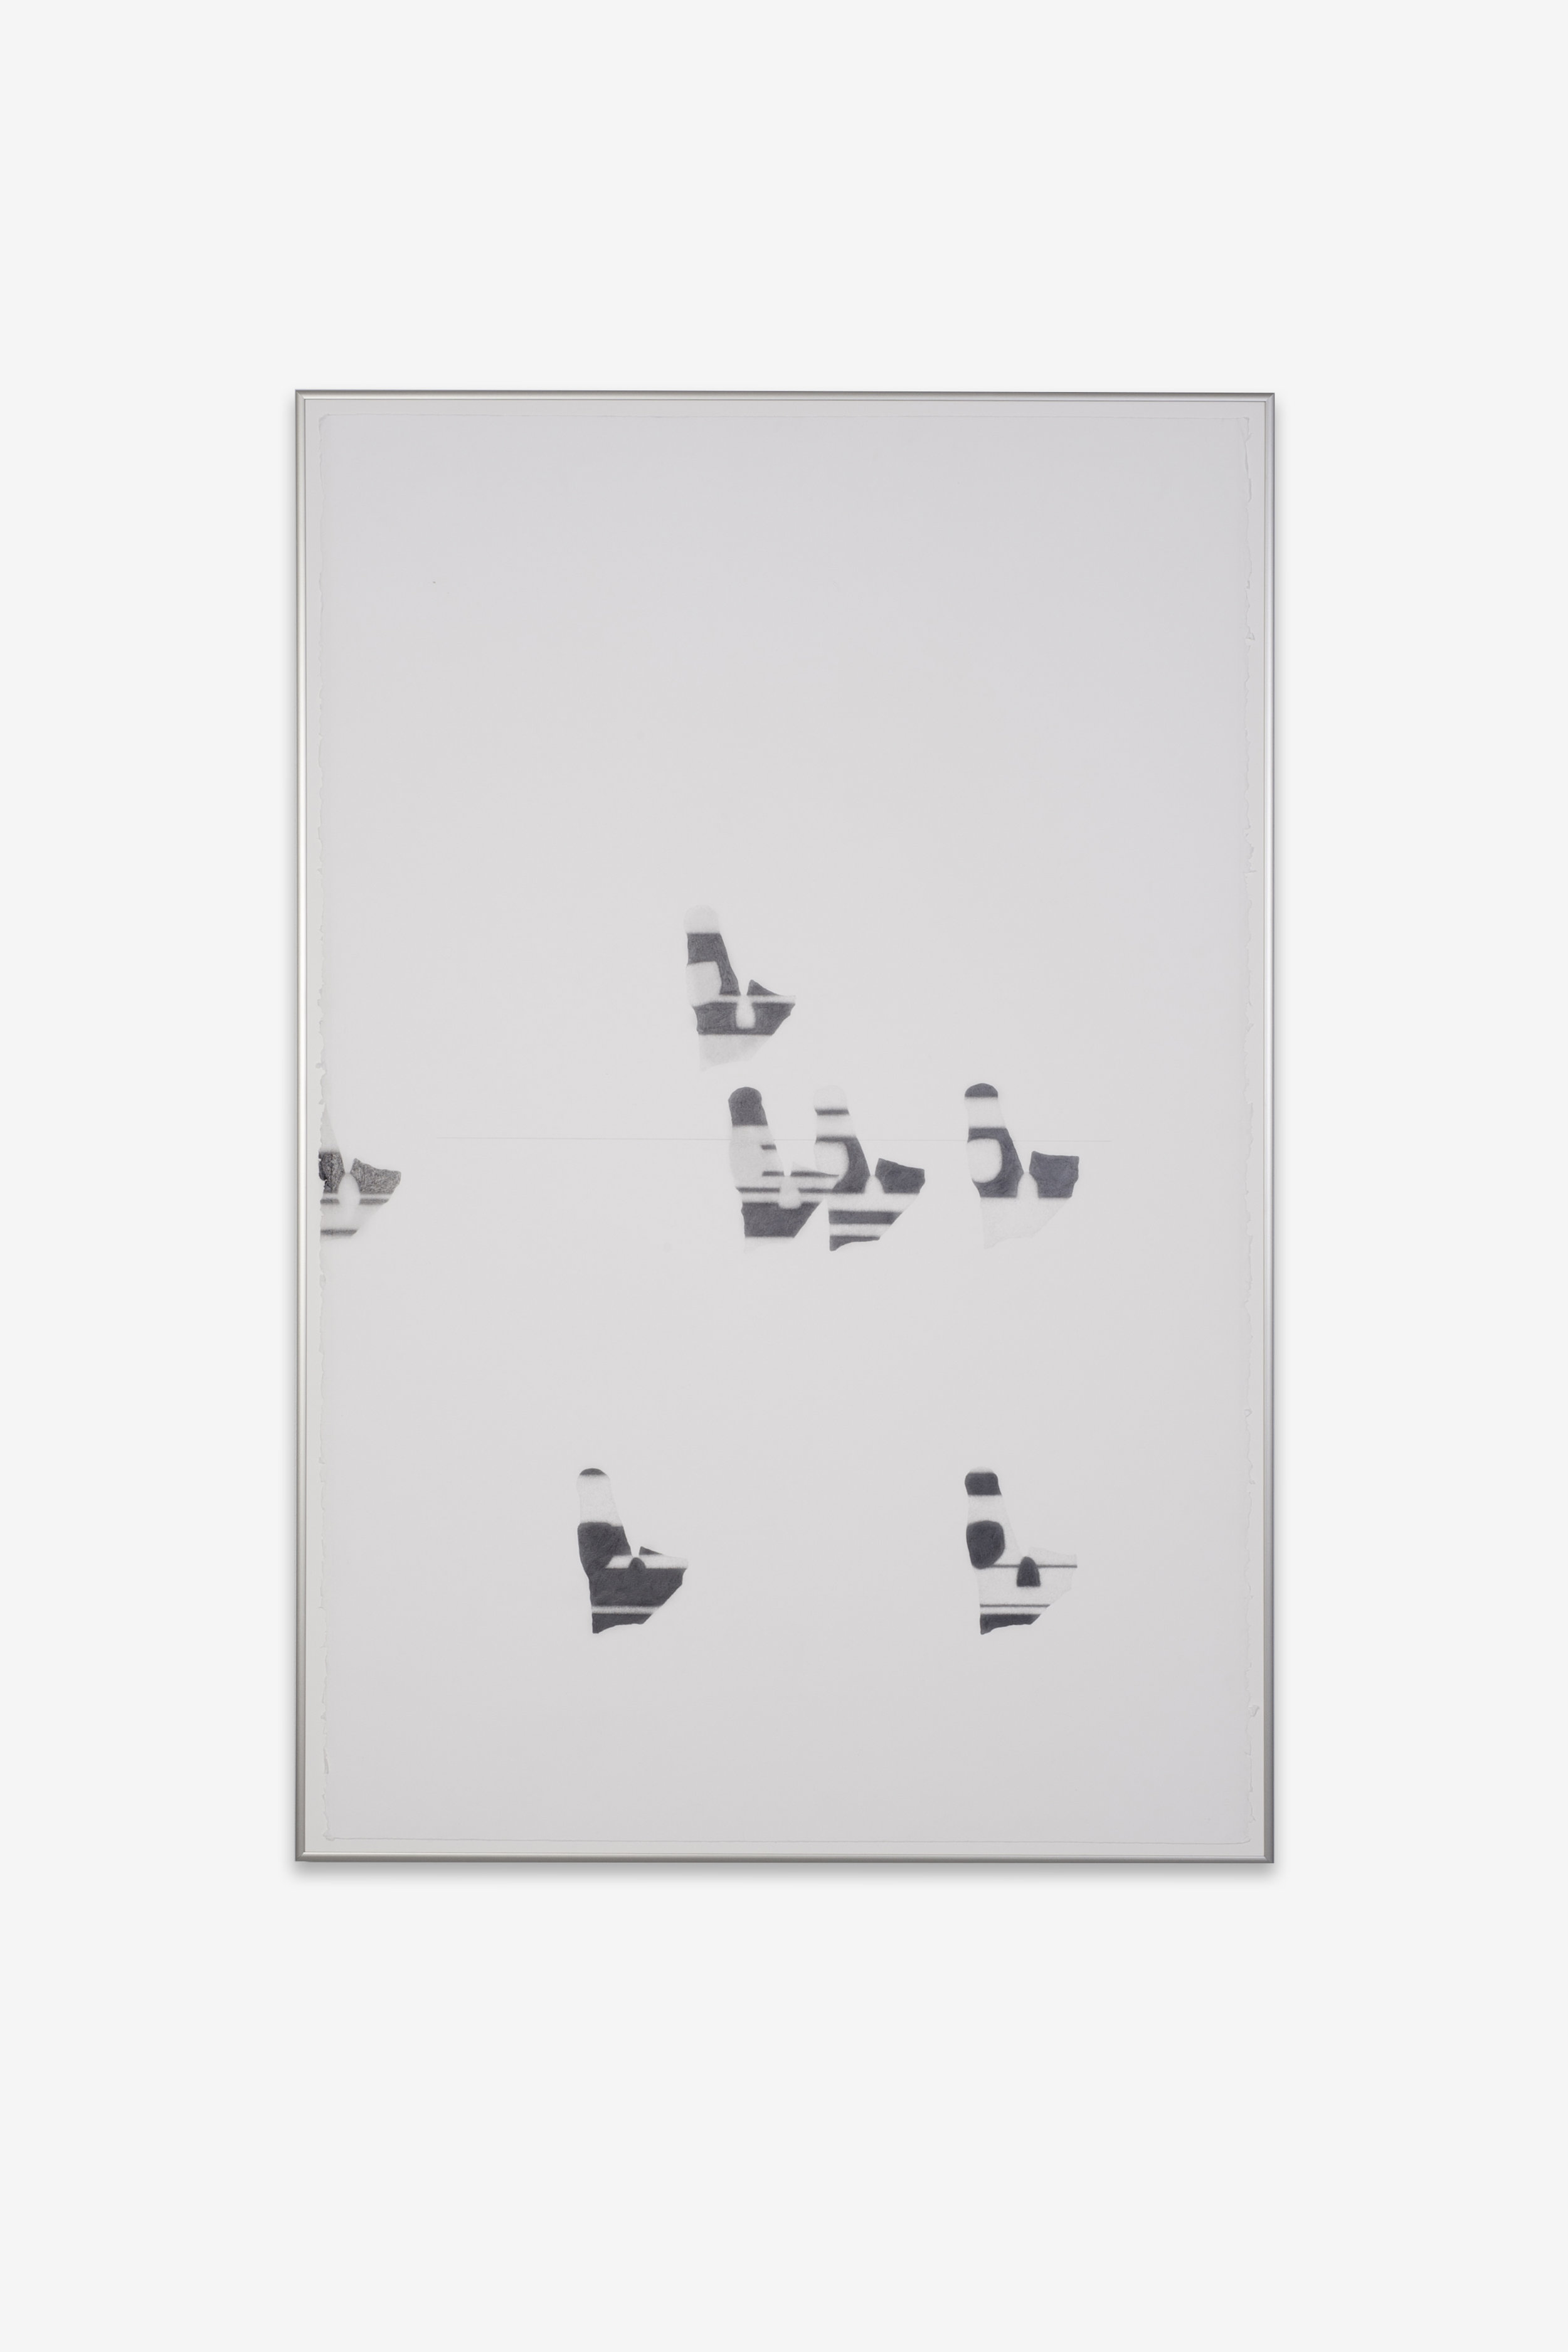  Laura Figa,  Untitled , 2018, graphite drawing on paper, 26 x 40 inches 